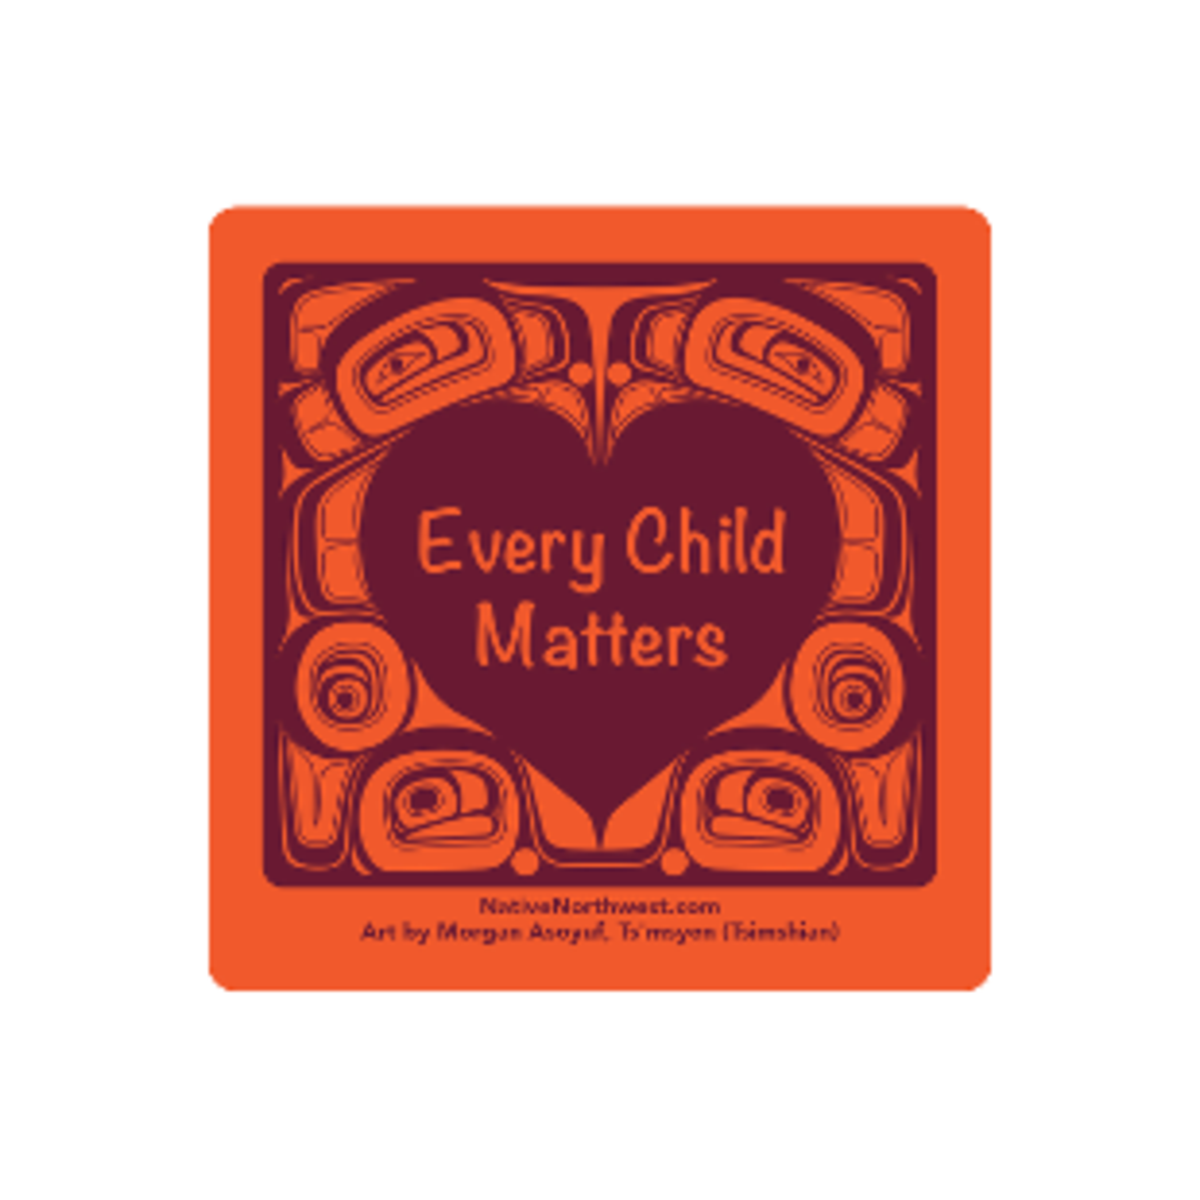 Sticker (2 pack) - “Every Child Matters” by Morgan Asoyuf